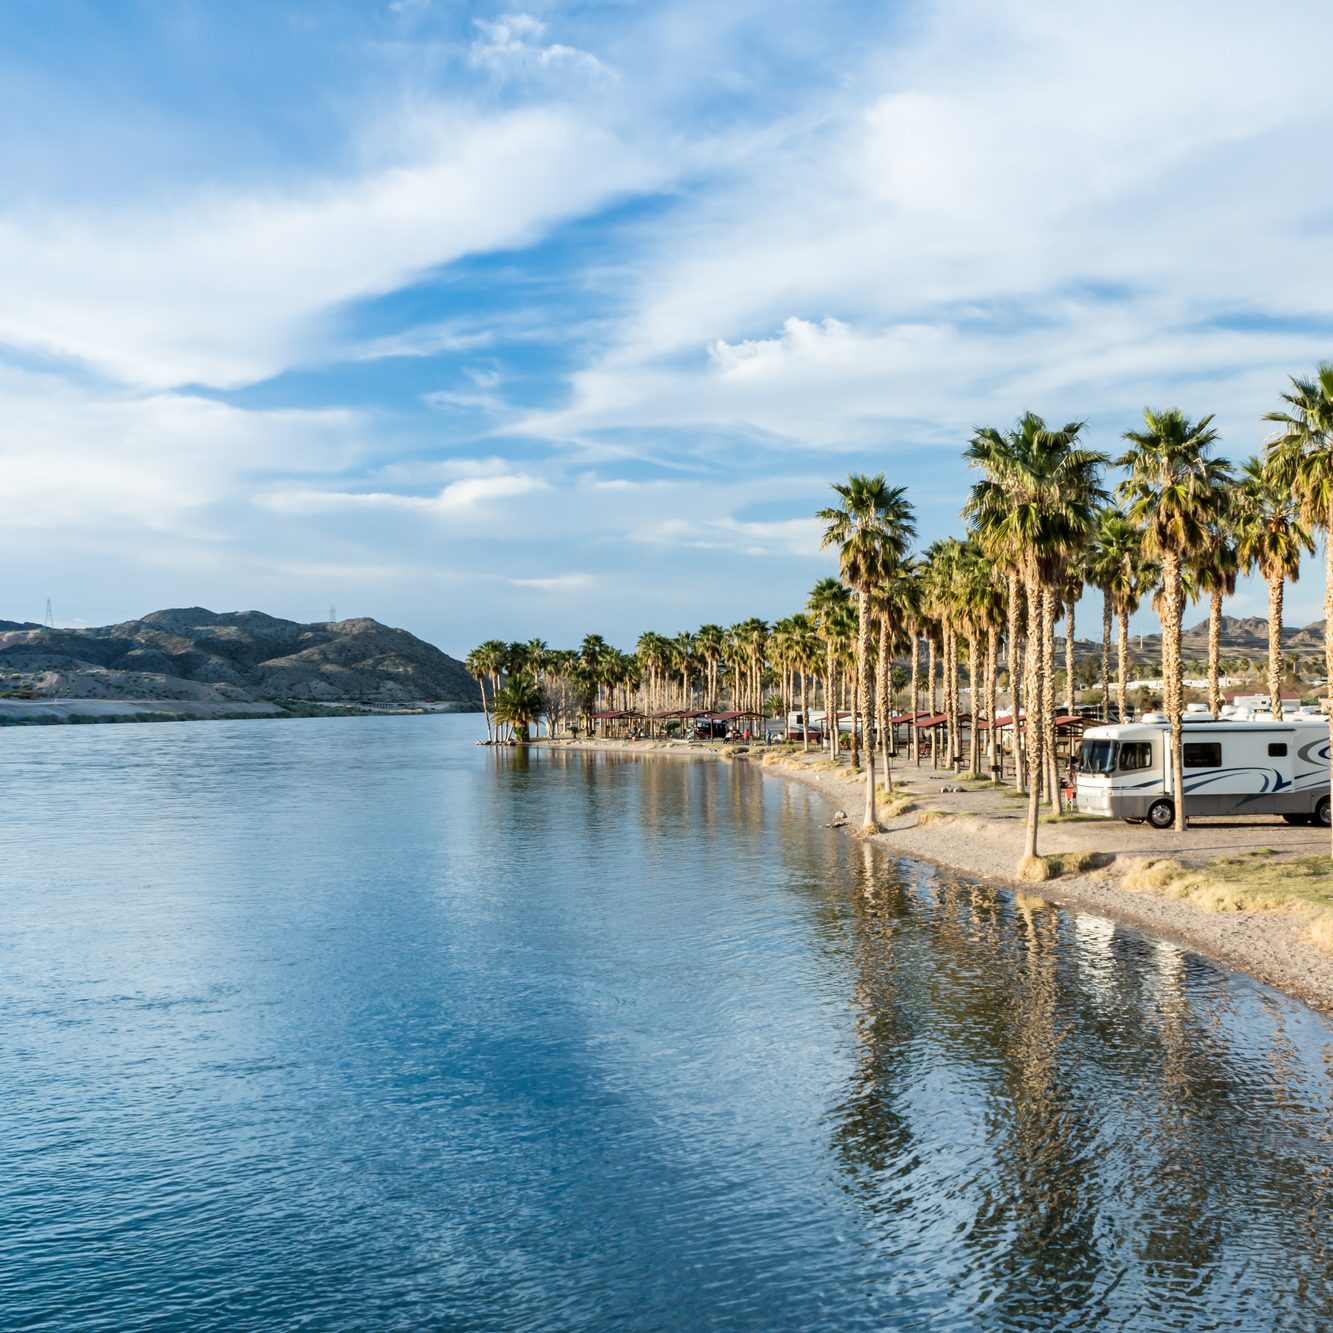 An RV campground on the shore of the Colorado River in Laughlin, Nevada, with sunshine and palm trees in winter.